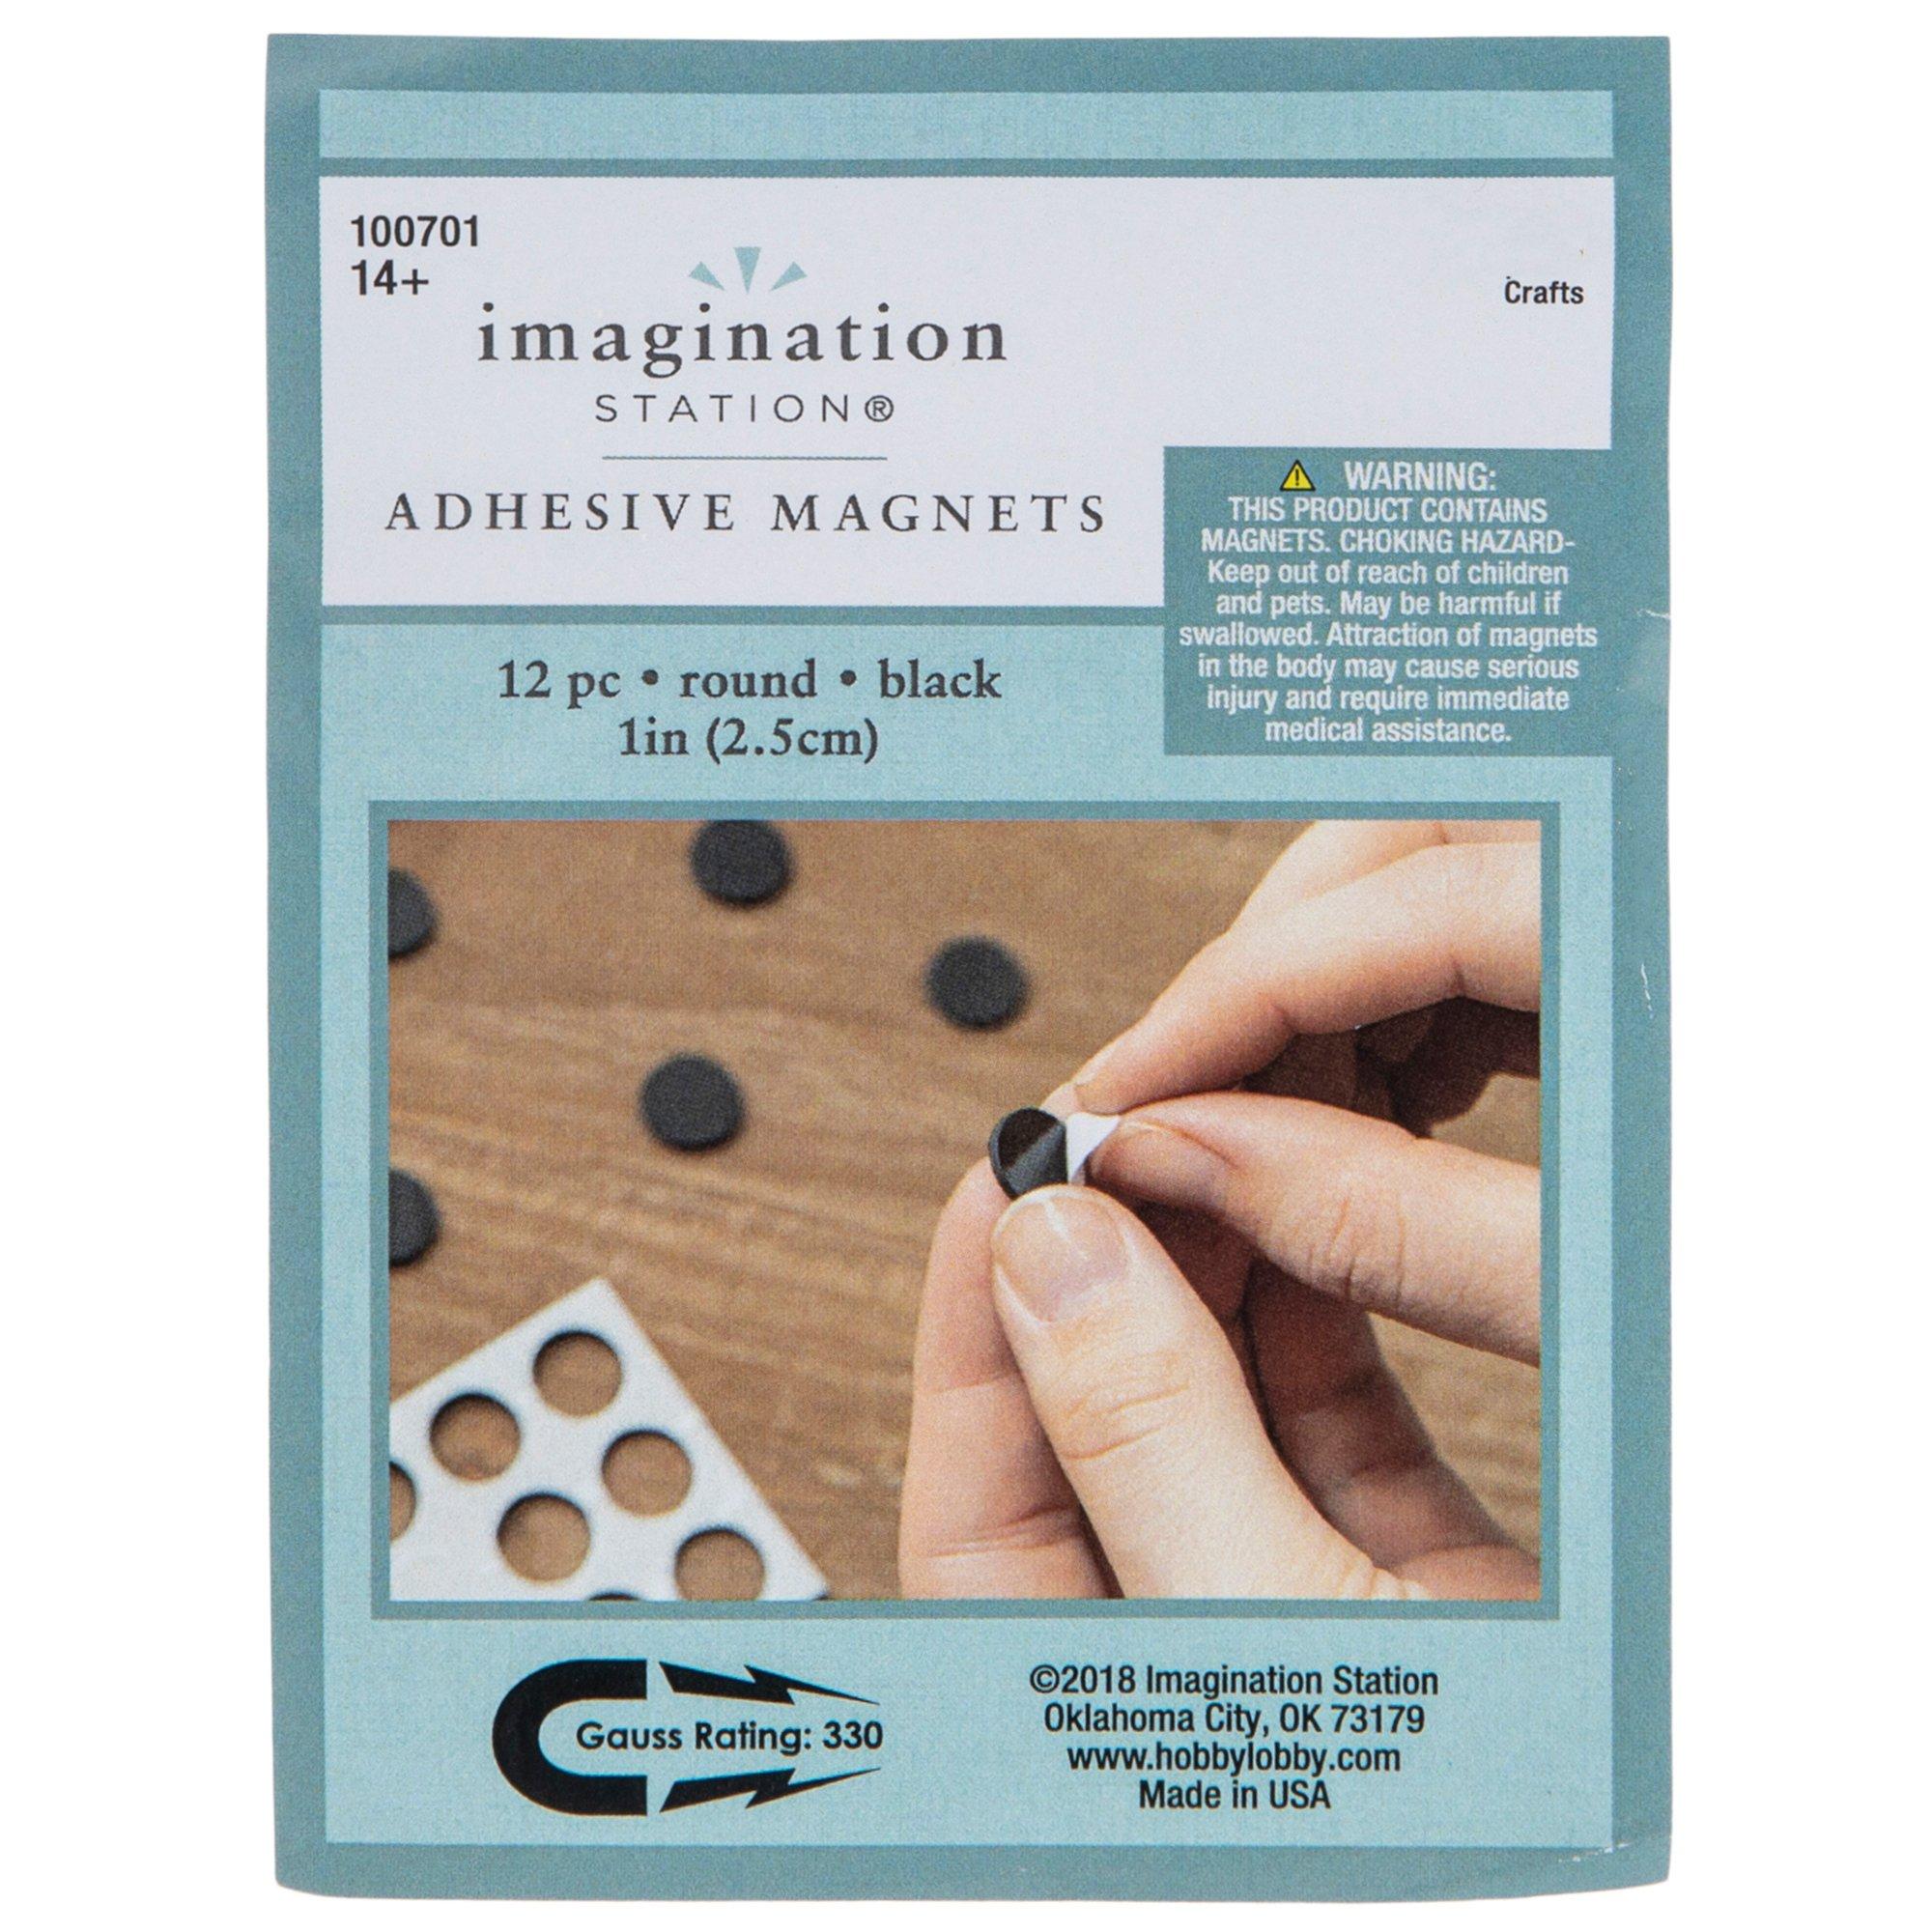 Round Magnets for Crafts with Adhesive Backing. Black Small Stickable  Magnets - Makes Anything a Magnet! 30 Pieces (1/2 inch, ¾ inch, 1 inch- 10